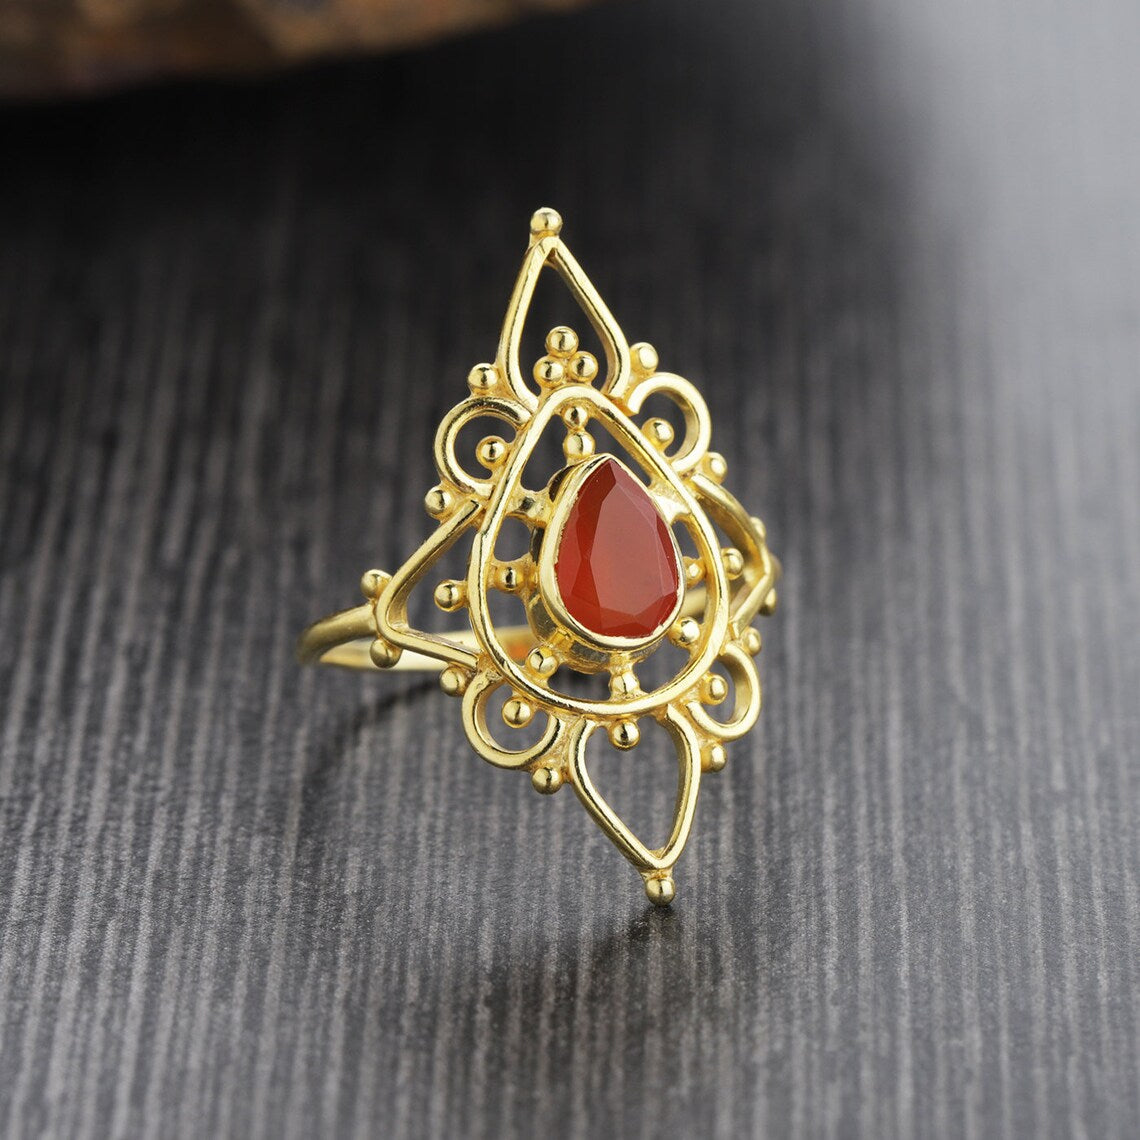 Natural Carnelian ring, 925 Sterling Silver Ring, Gold Plated Ring, Promise Ring, Handmade Ring, Statement Ring, August Birthstone Ring